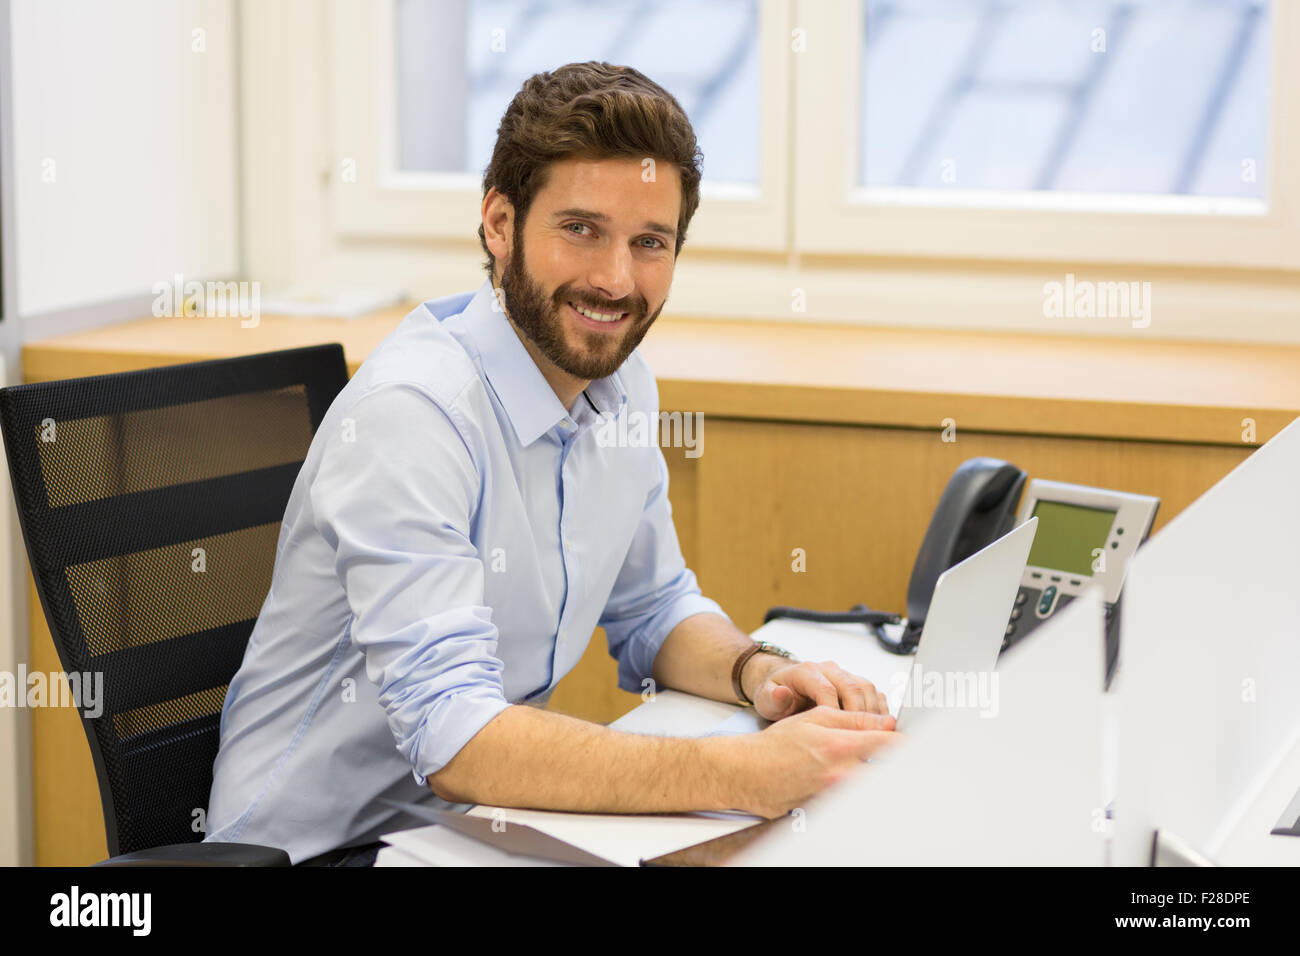 Portrait of bearded business man working at the office Stock Photo